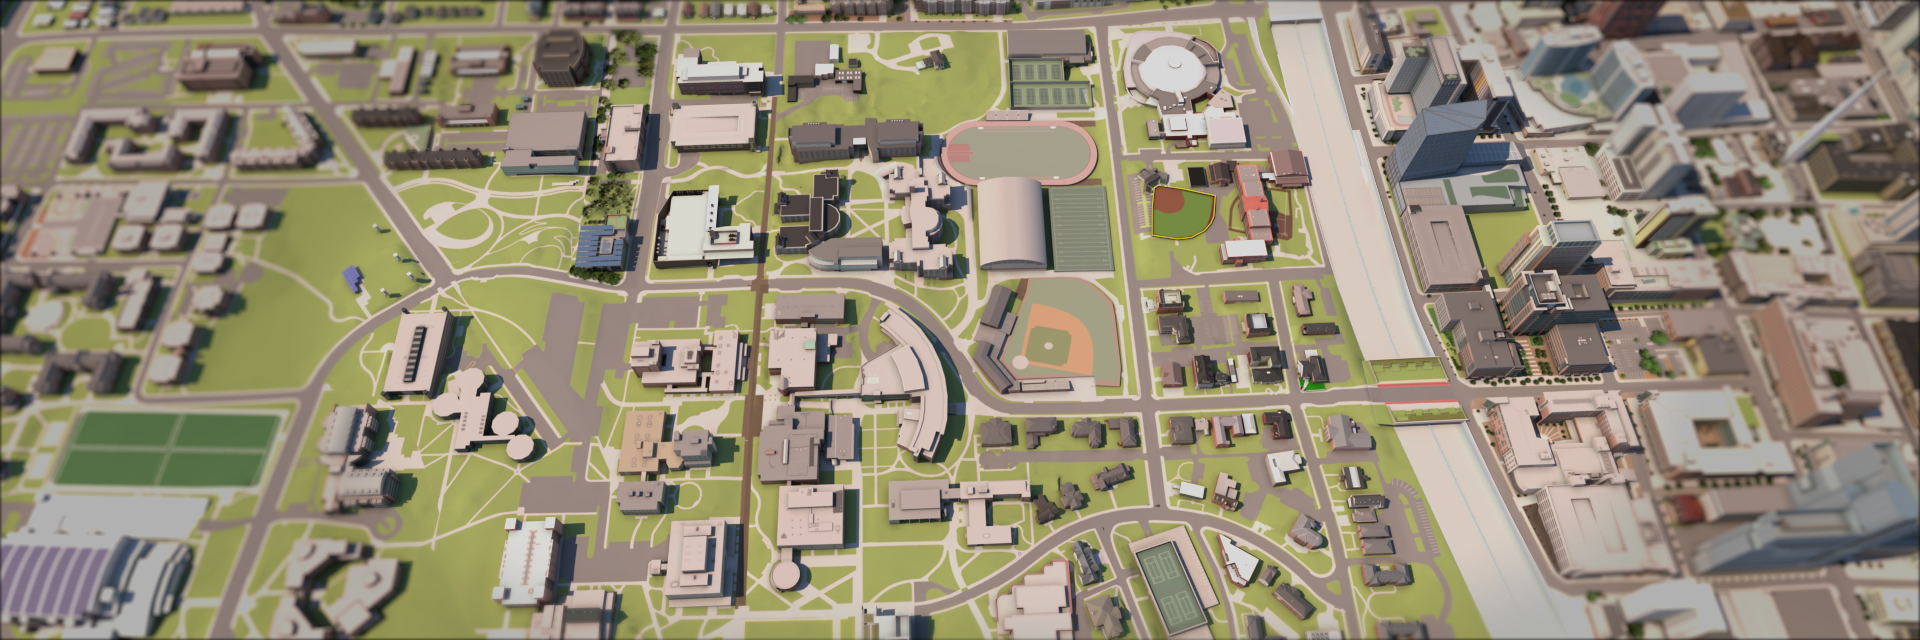 Rendered View of campus 